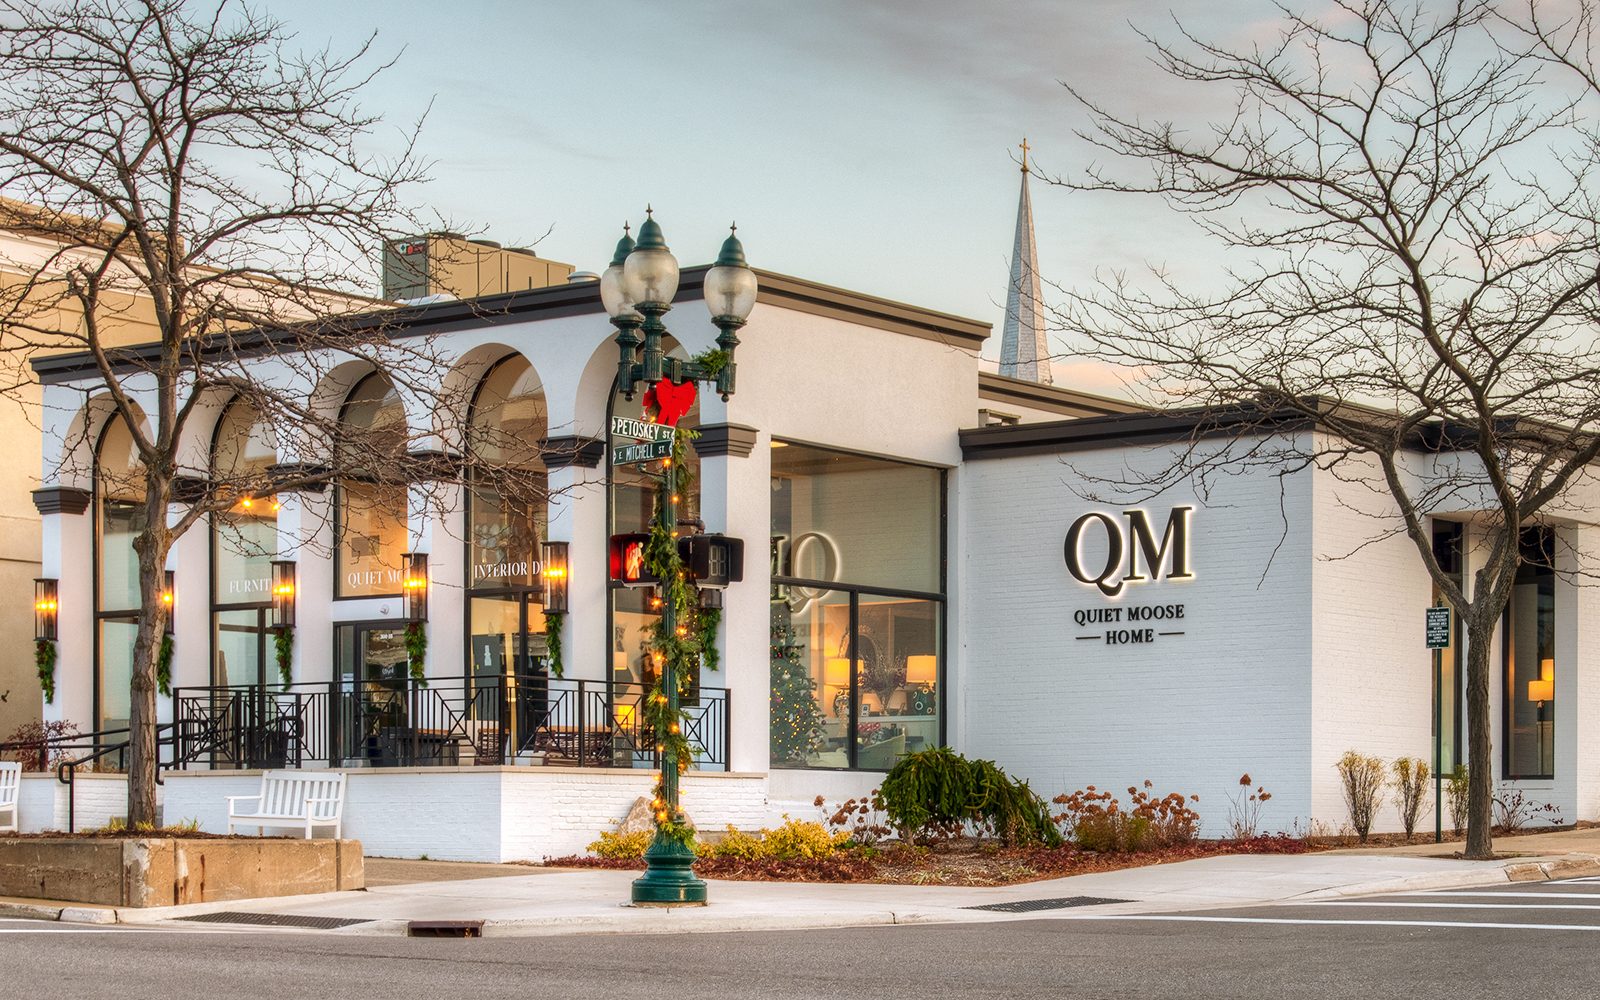 QM-Showroom | The Quiet Moose is a full-service interior design studio and furniture store based in Petoskey, Michigan